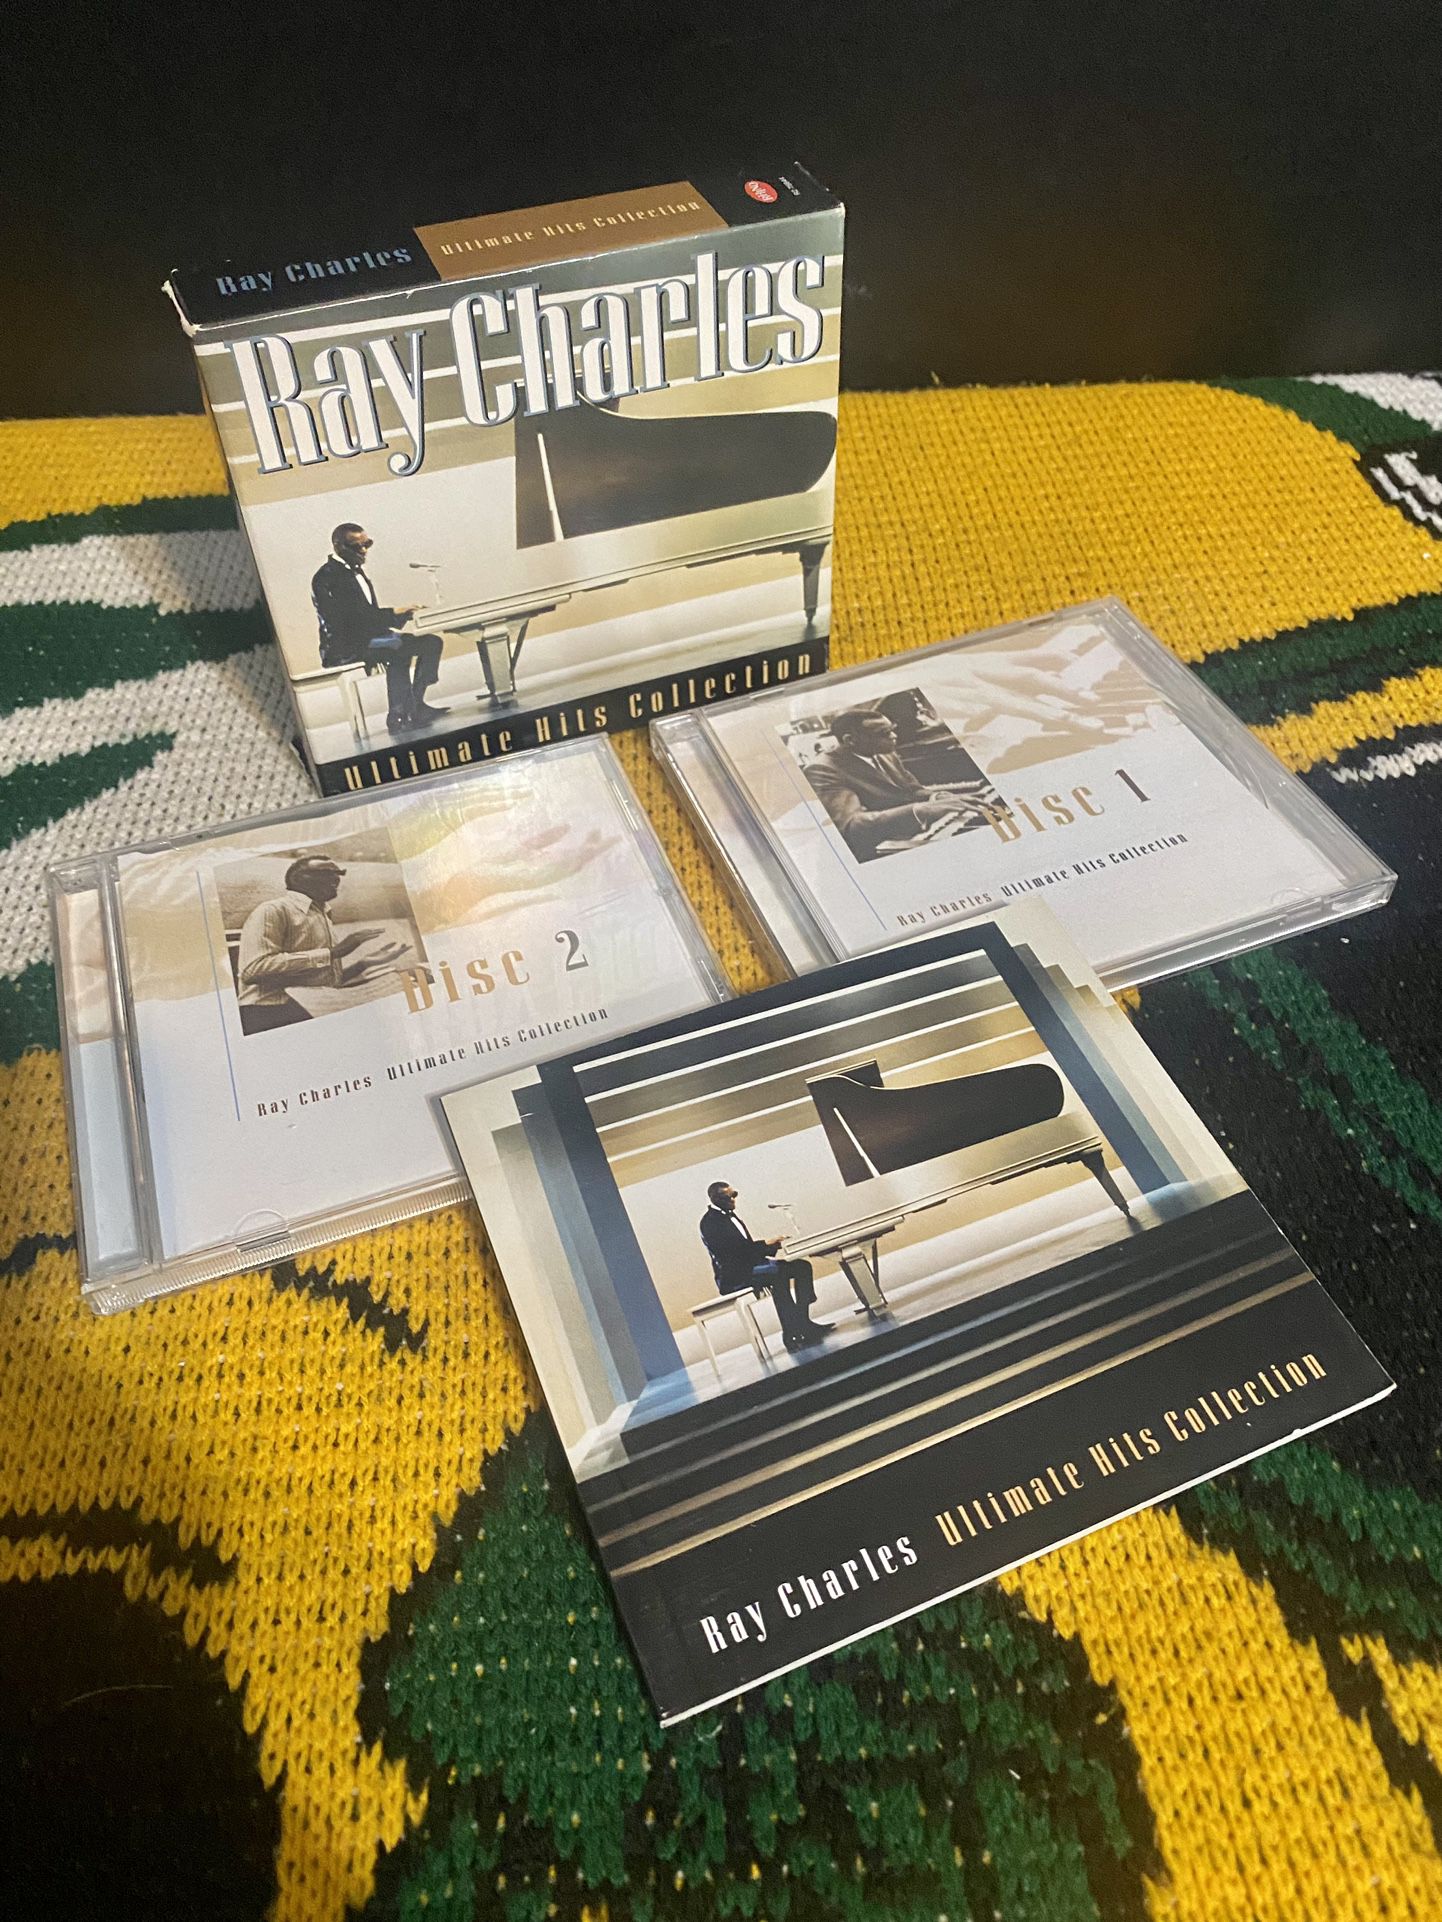 Ray Charles Ultimate Hits CD Collection.